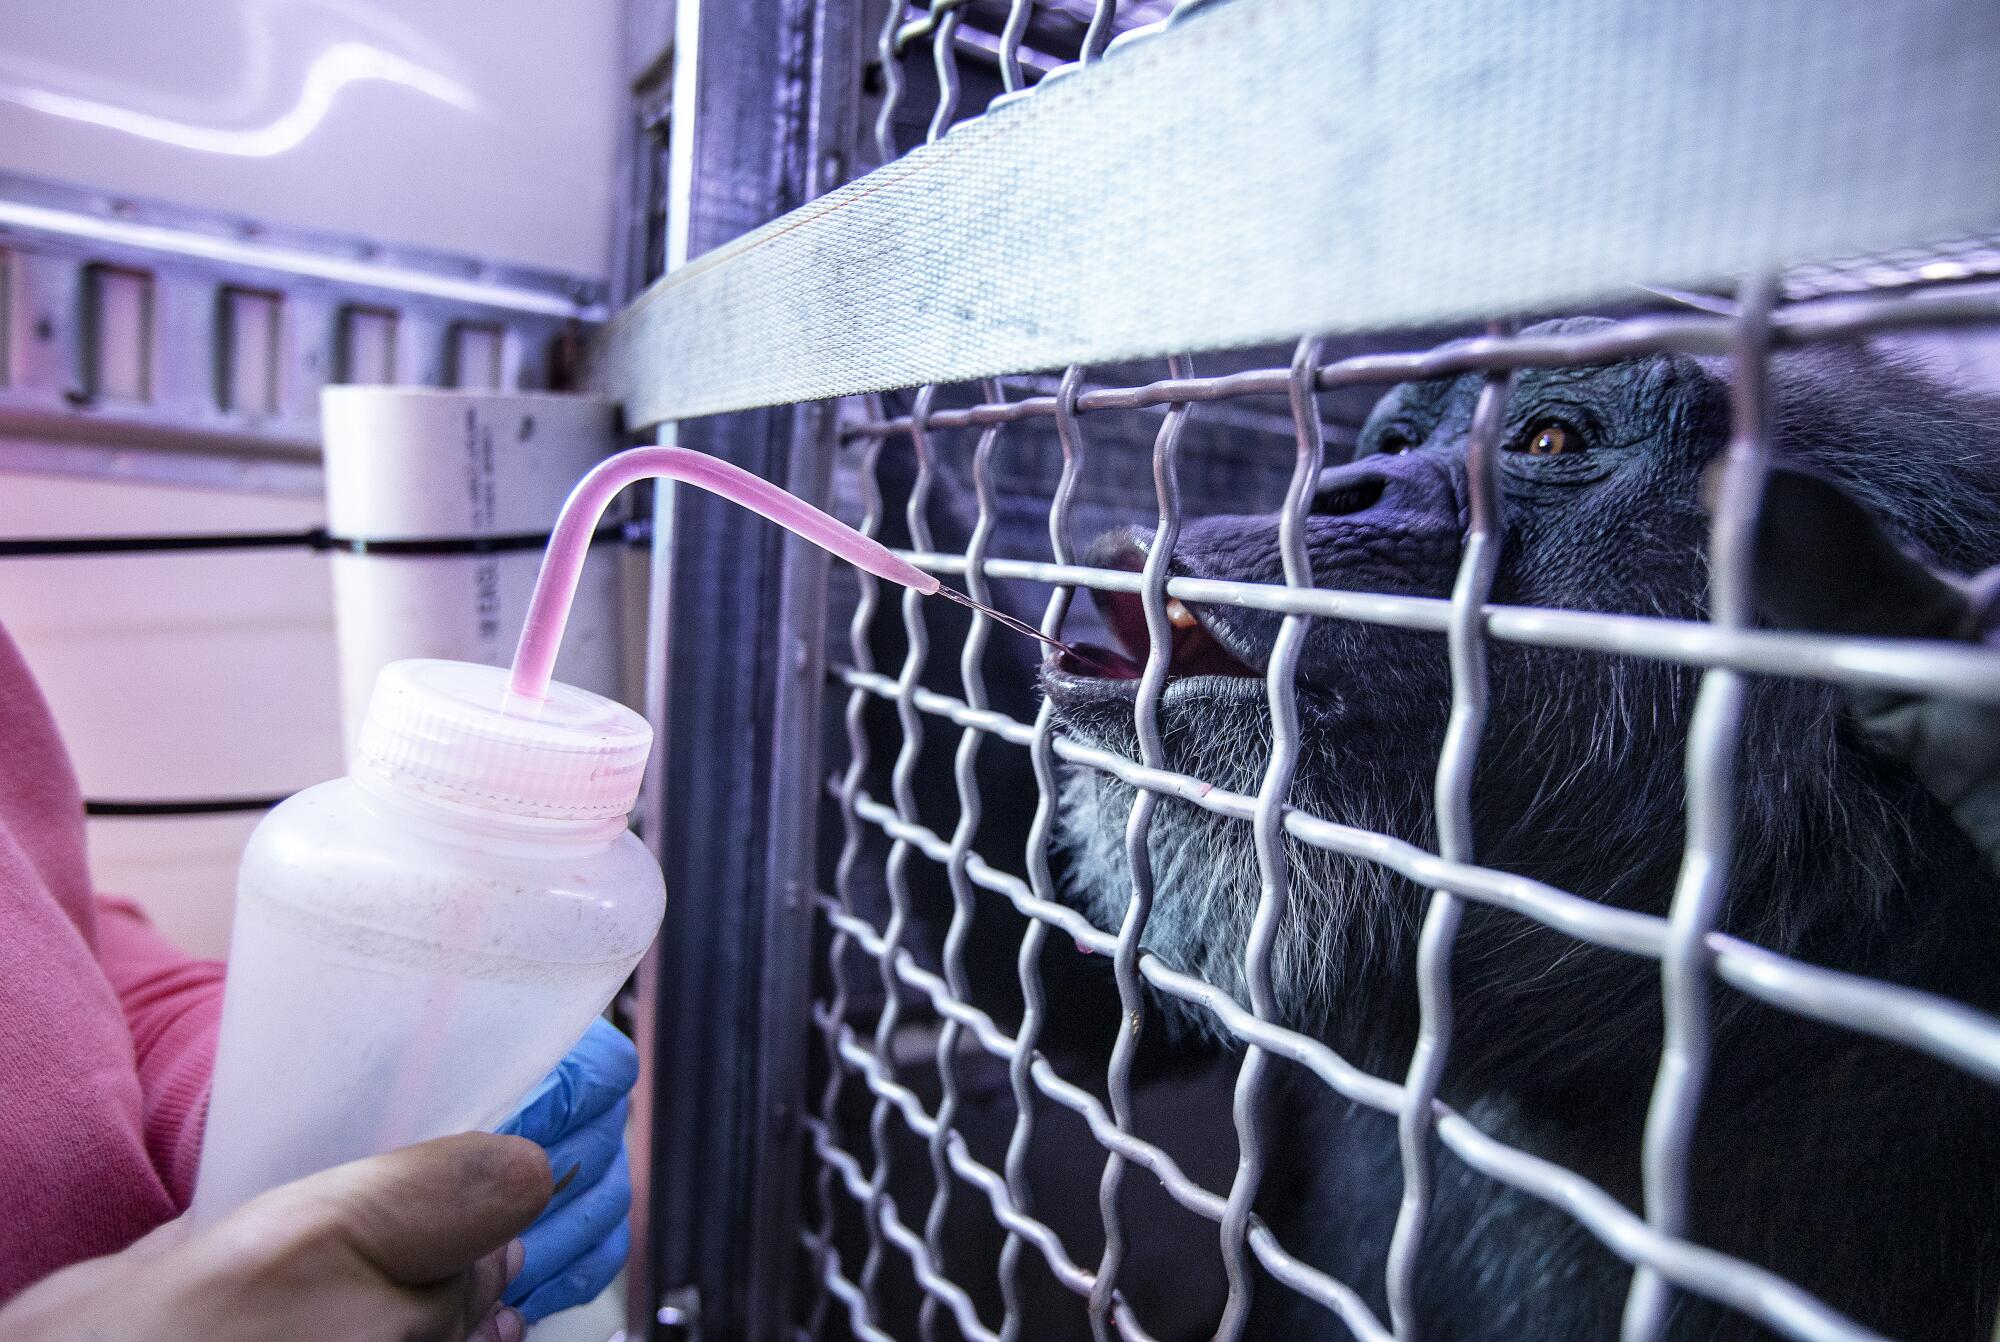 A chimpanzee drinking a spritz of Gatorade through the metal grate of a cage